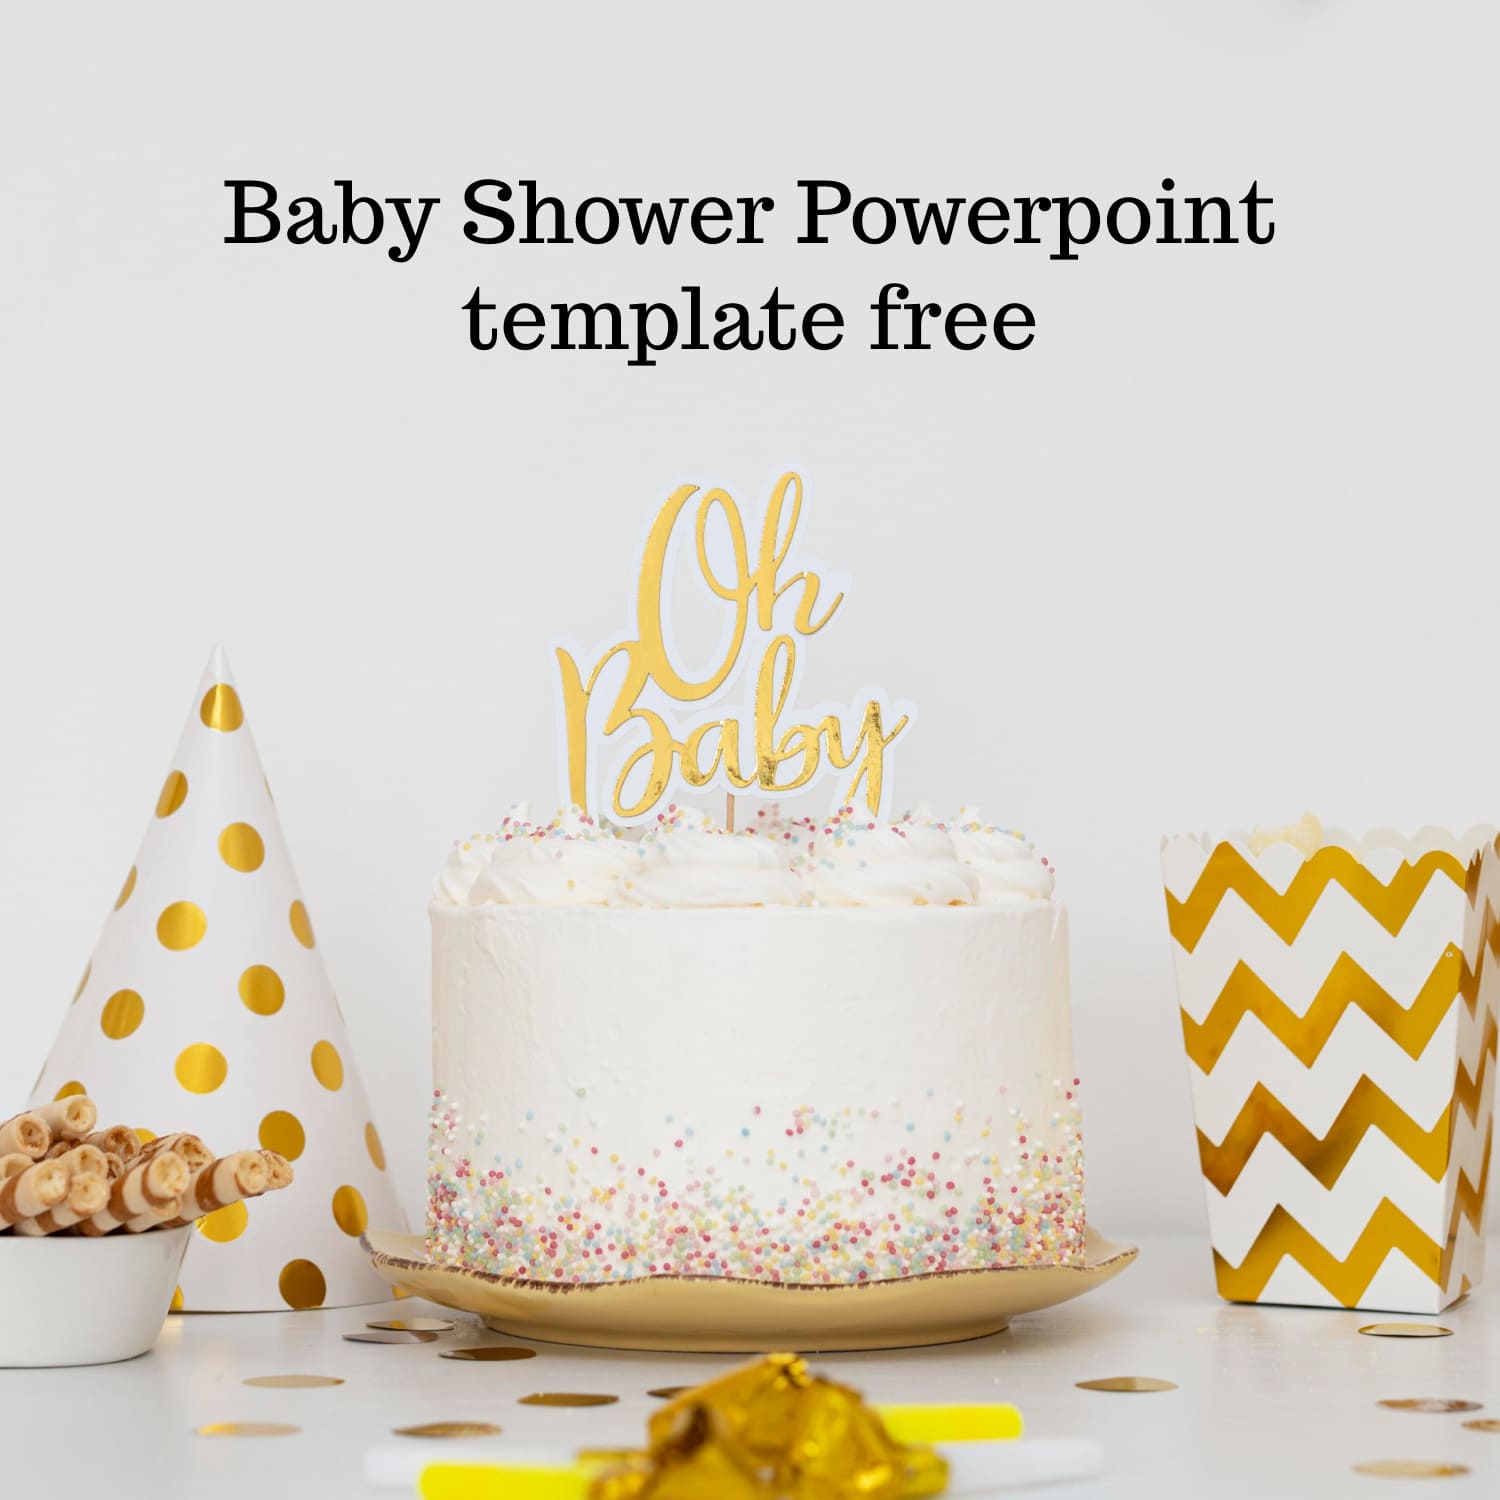 1500 1 Baby Shower Powerpoint Template Free.